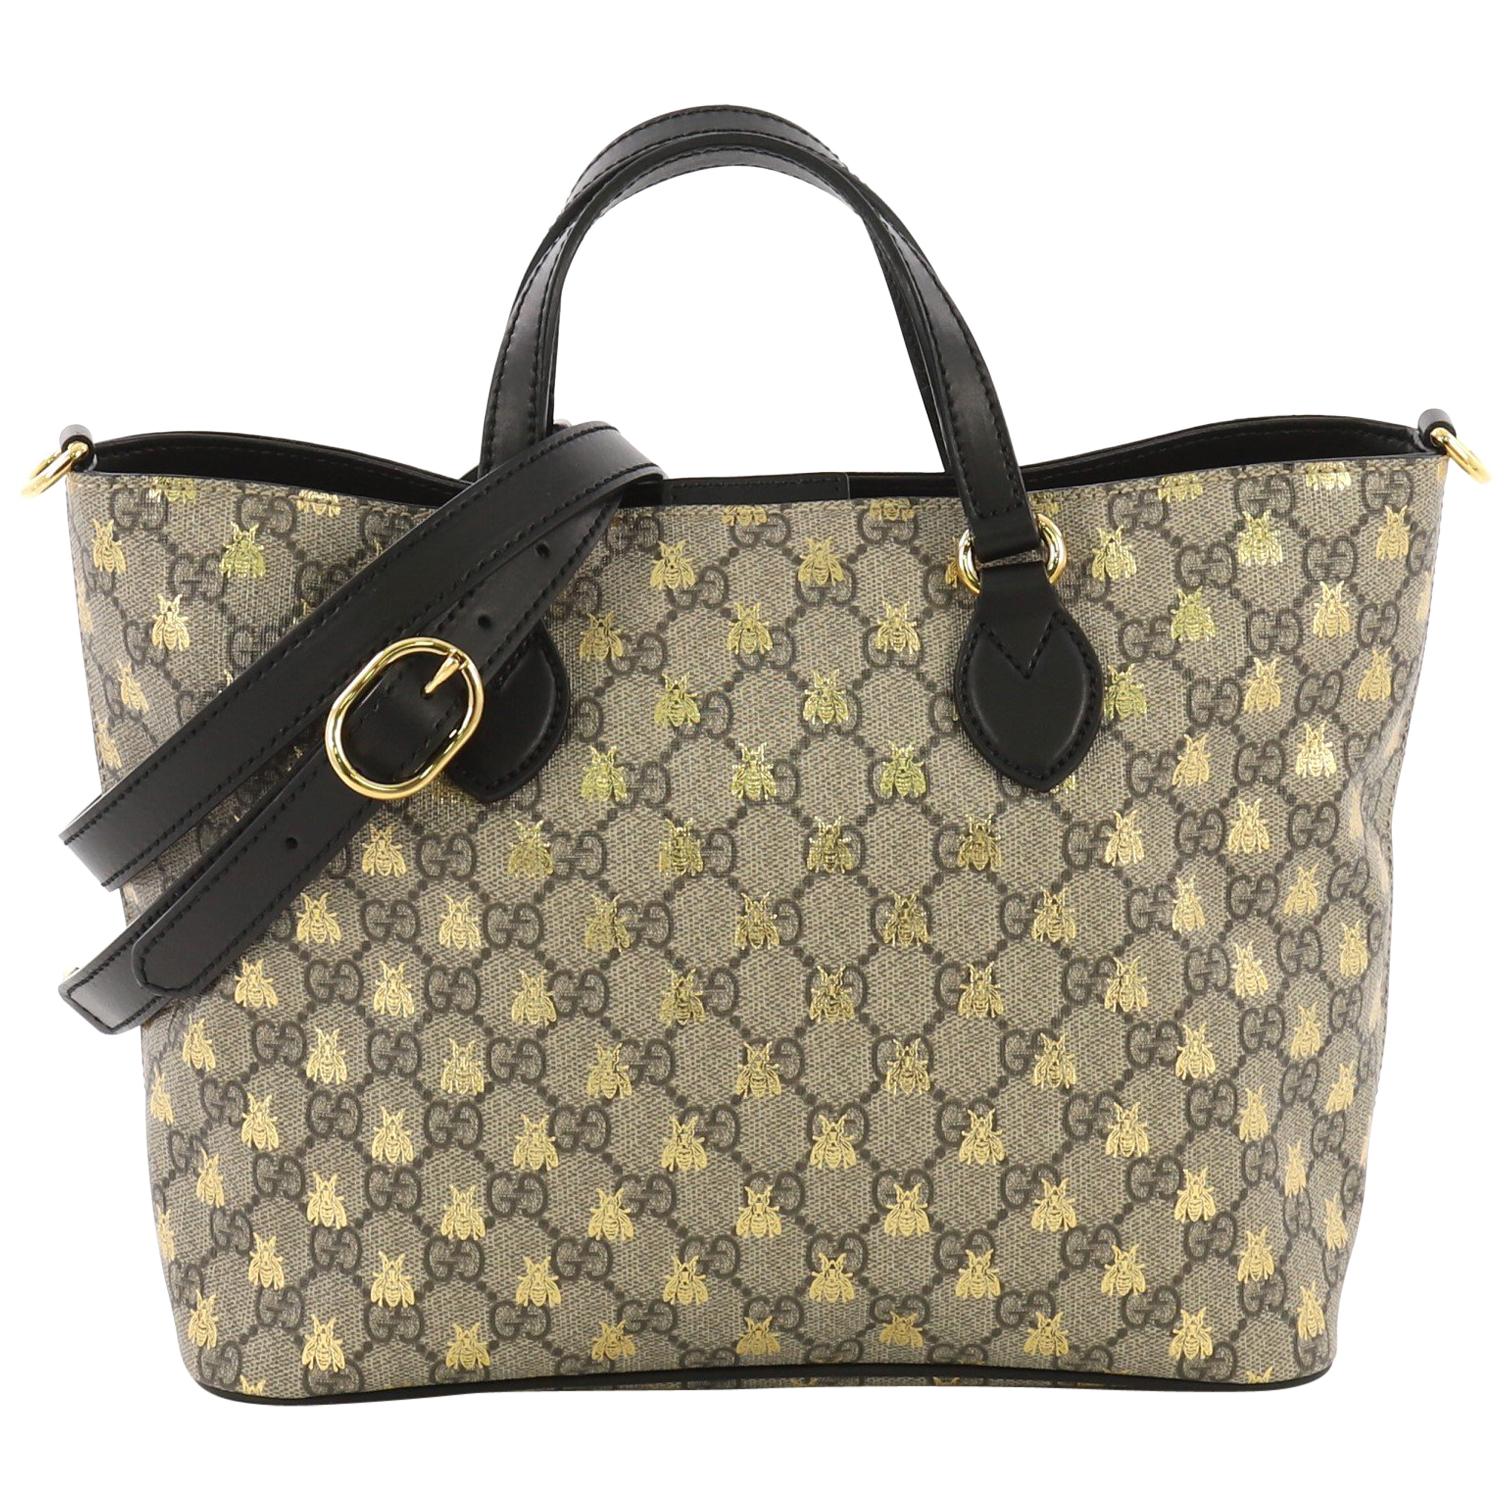 Gucci Convertible Soft Tote Printed GG Coated Canvas Small